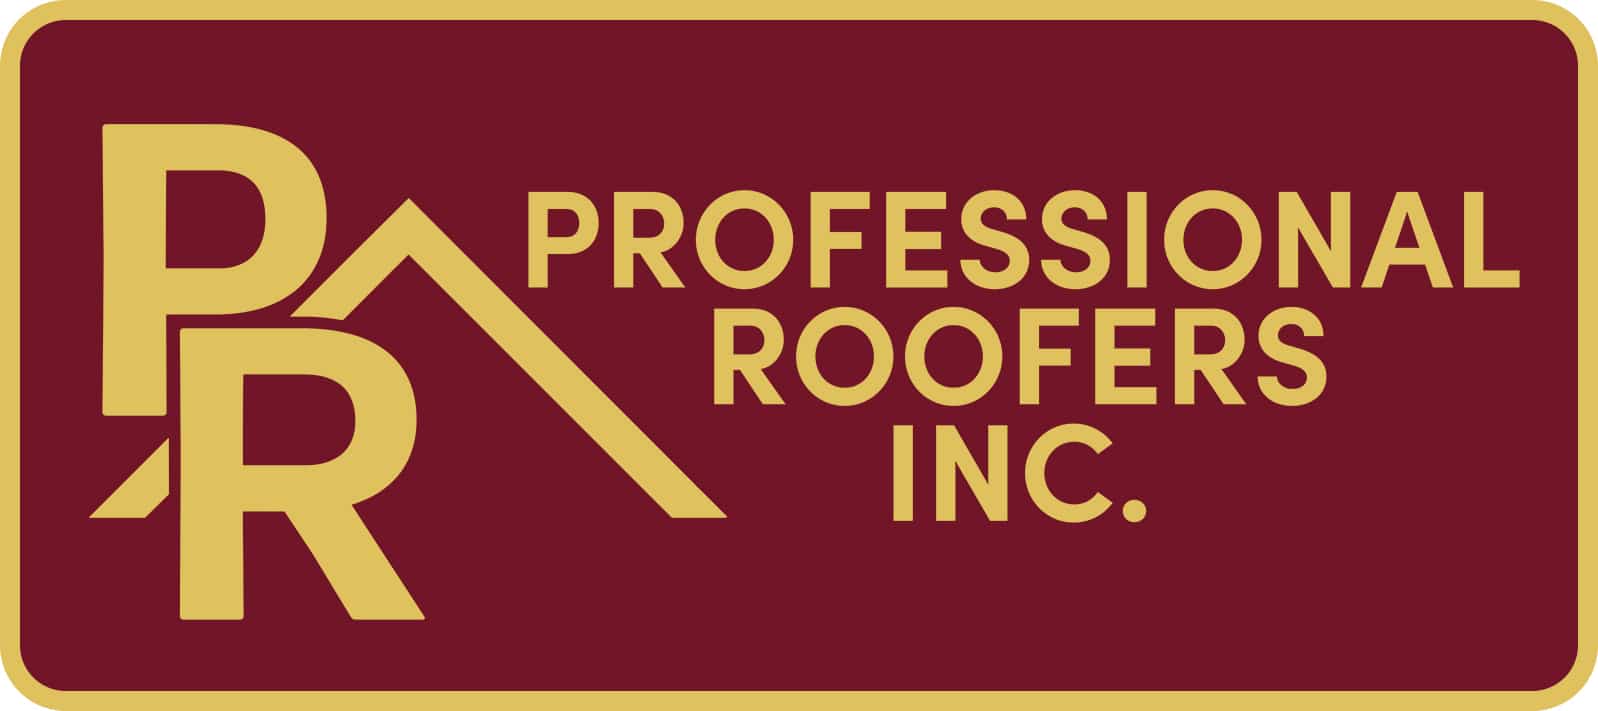 Professional Roofers, Inc. - Trusted Local Roofers